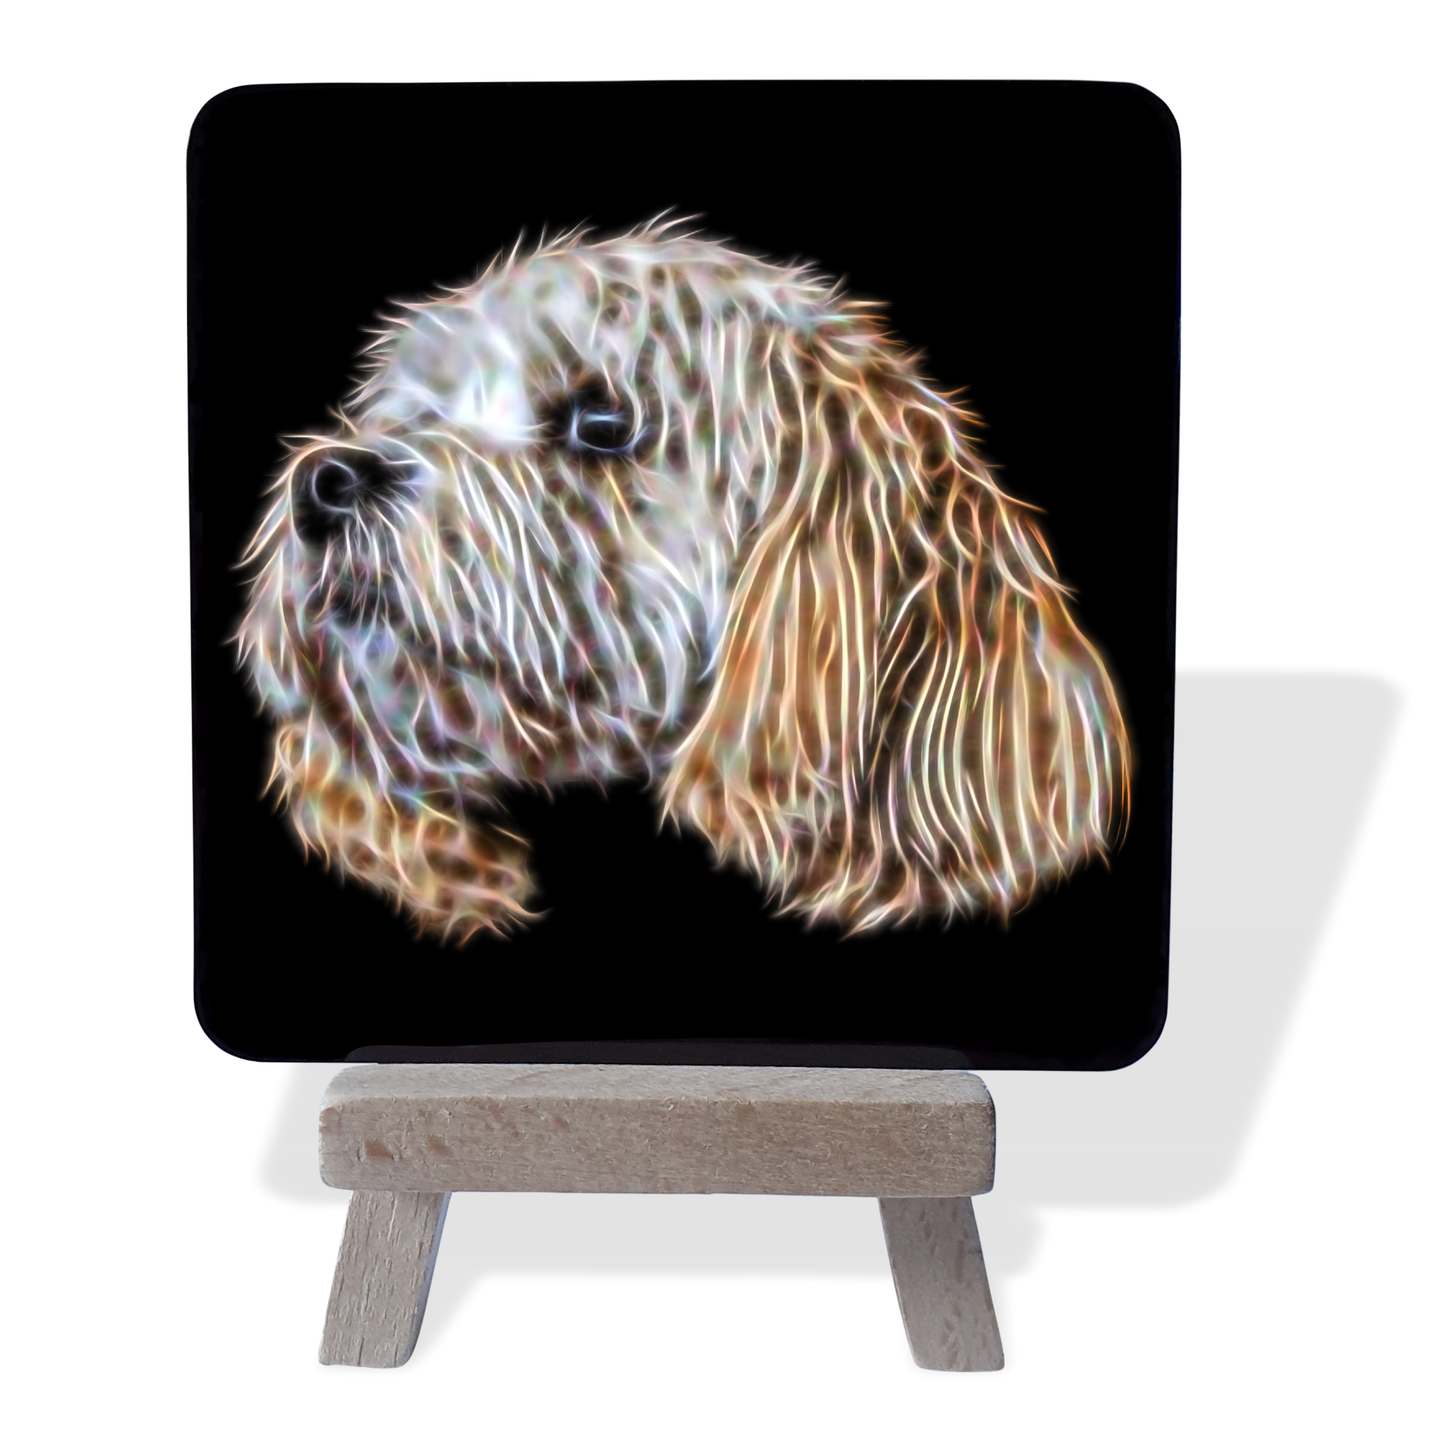 Cavachon # 2 Metal Plaque and Mini Easel with Fractal Art Design